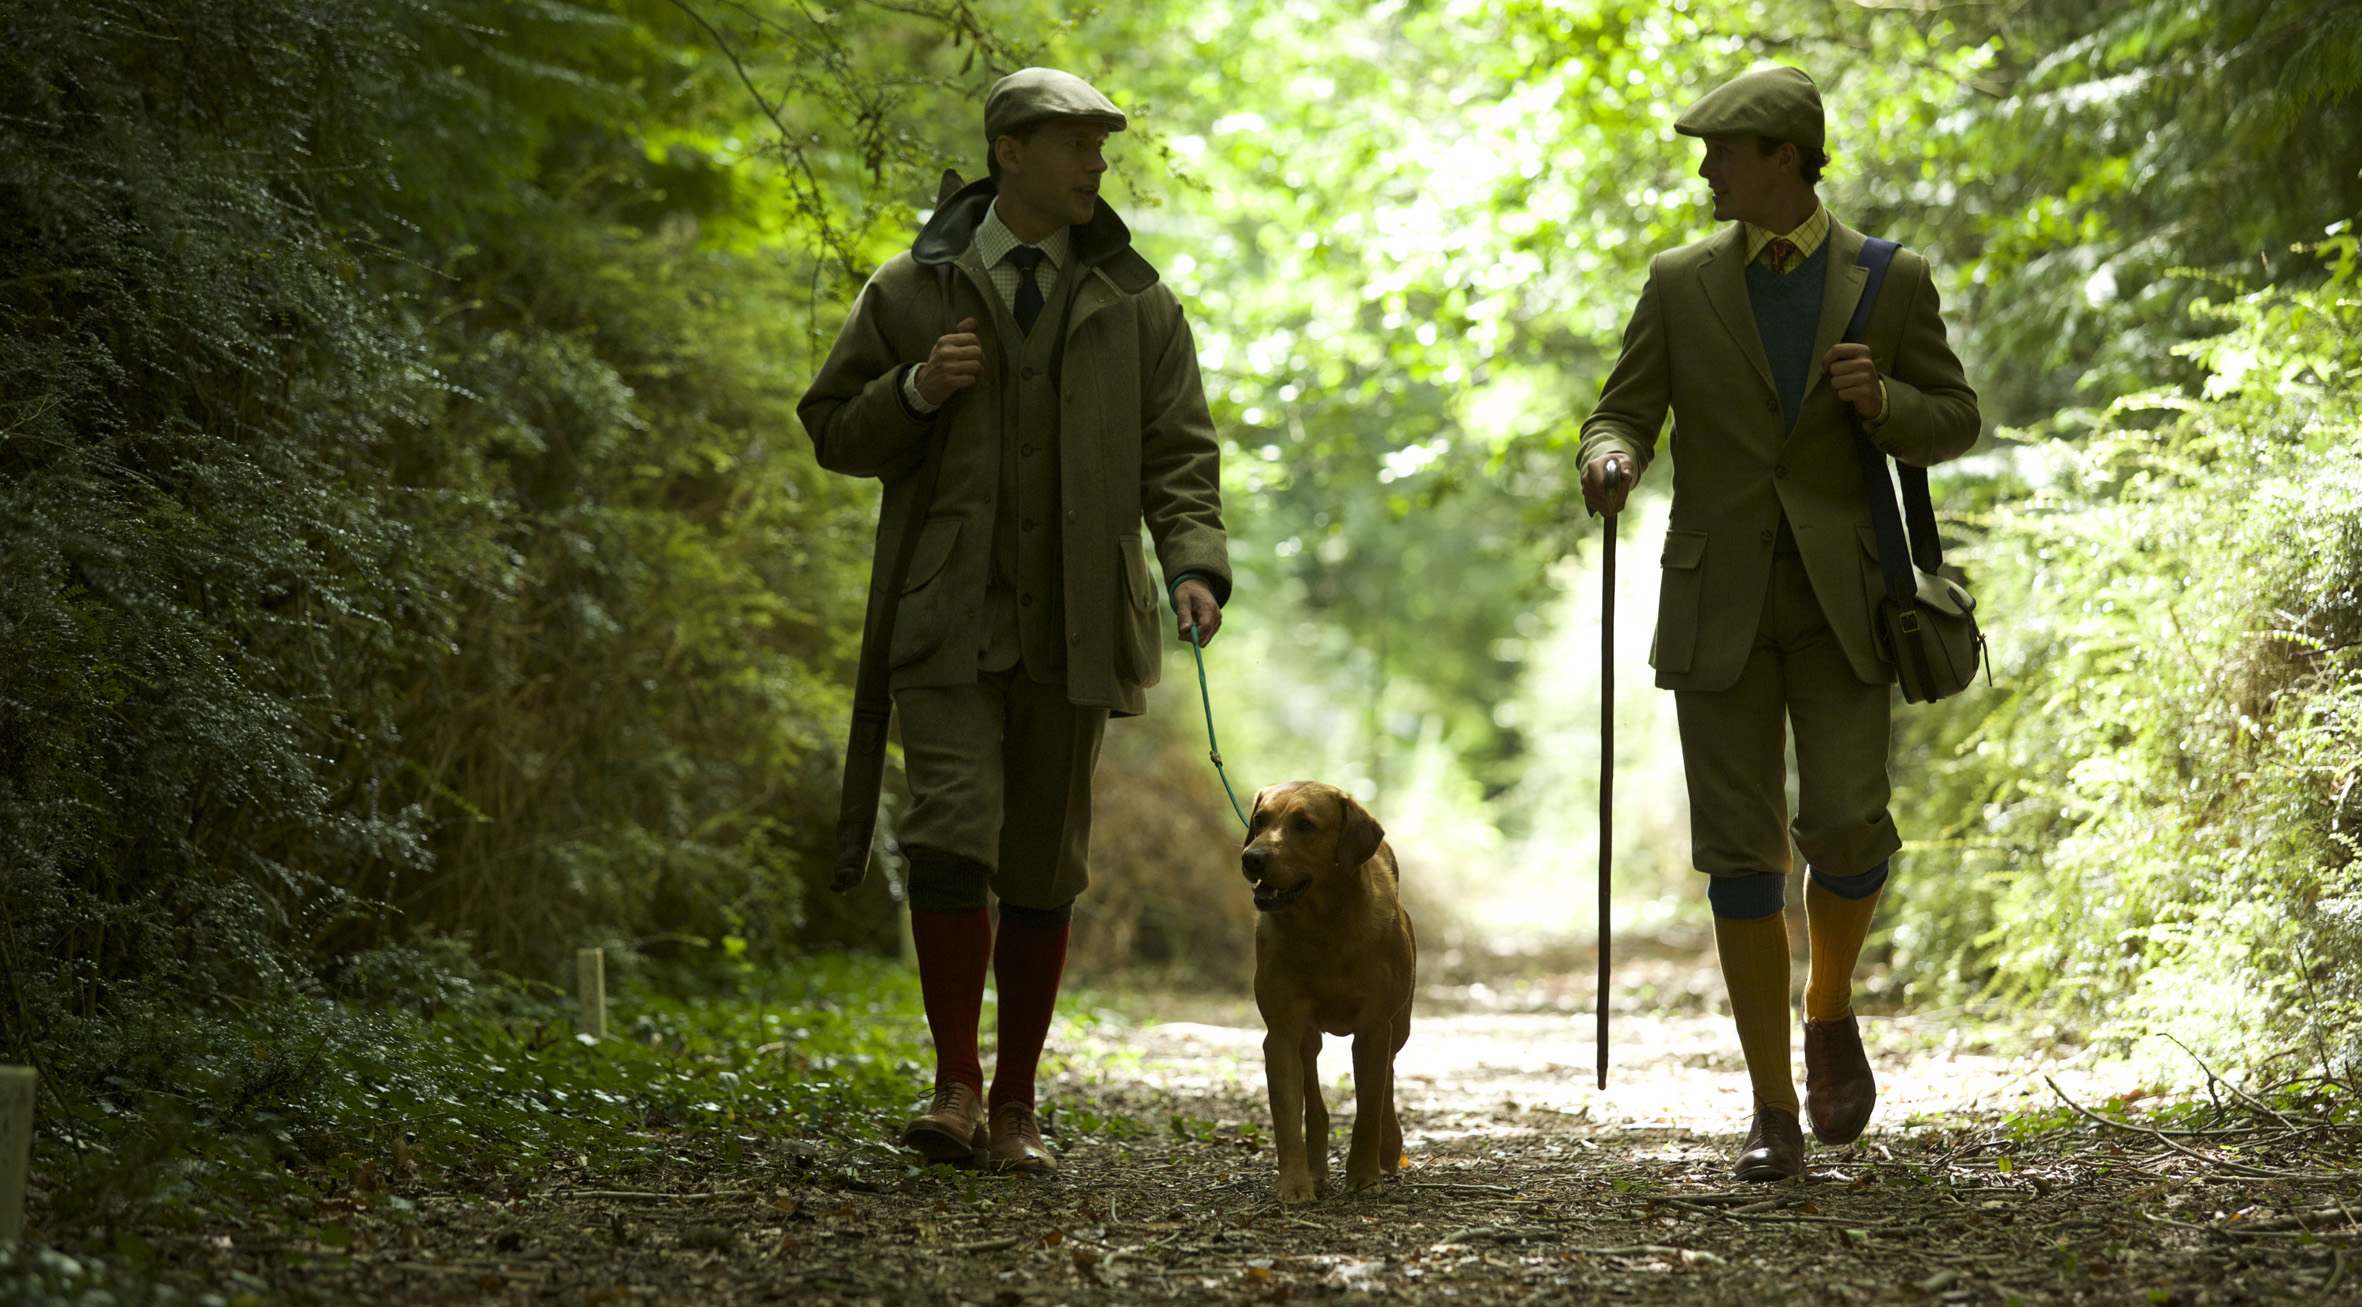 Two men dressed in green tweed shooting clothing walking along a forest pathway with a golden Labrador